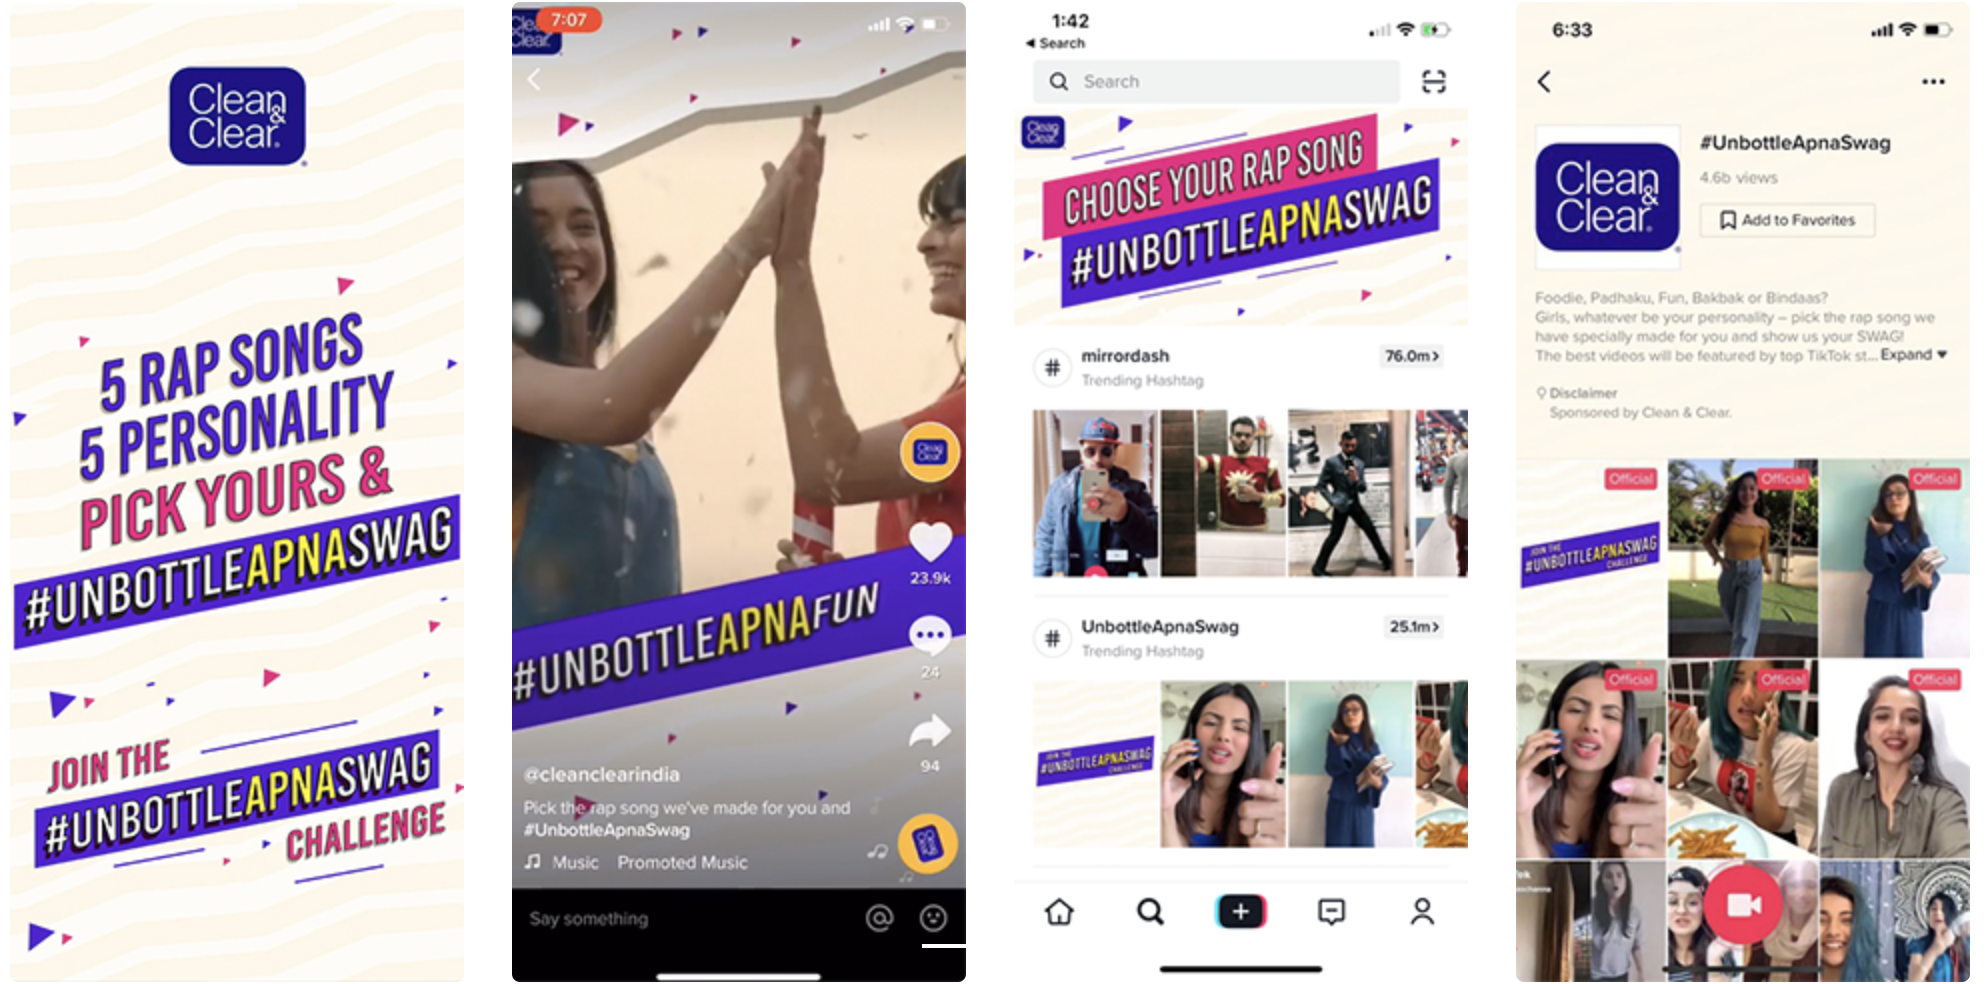 The Ultimate Guide to TikTok Advertising - Manychat Blog